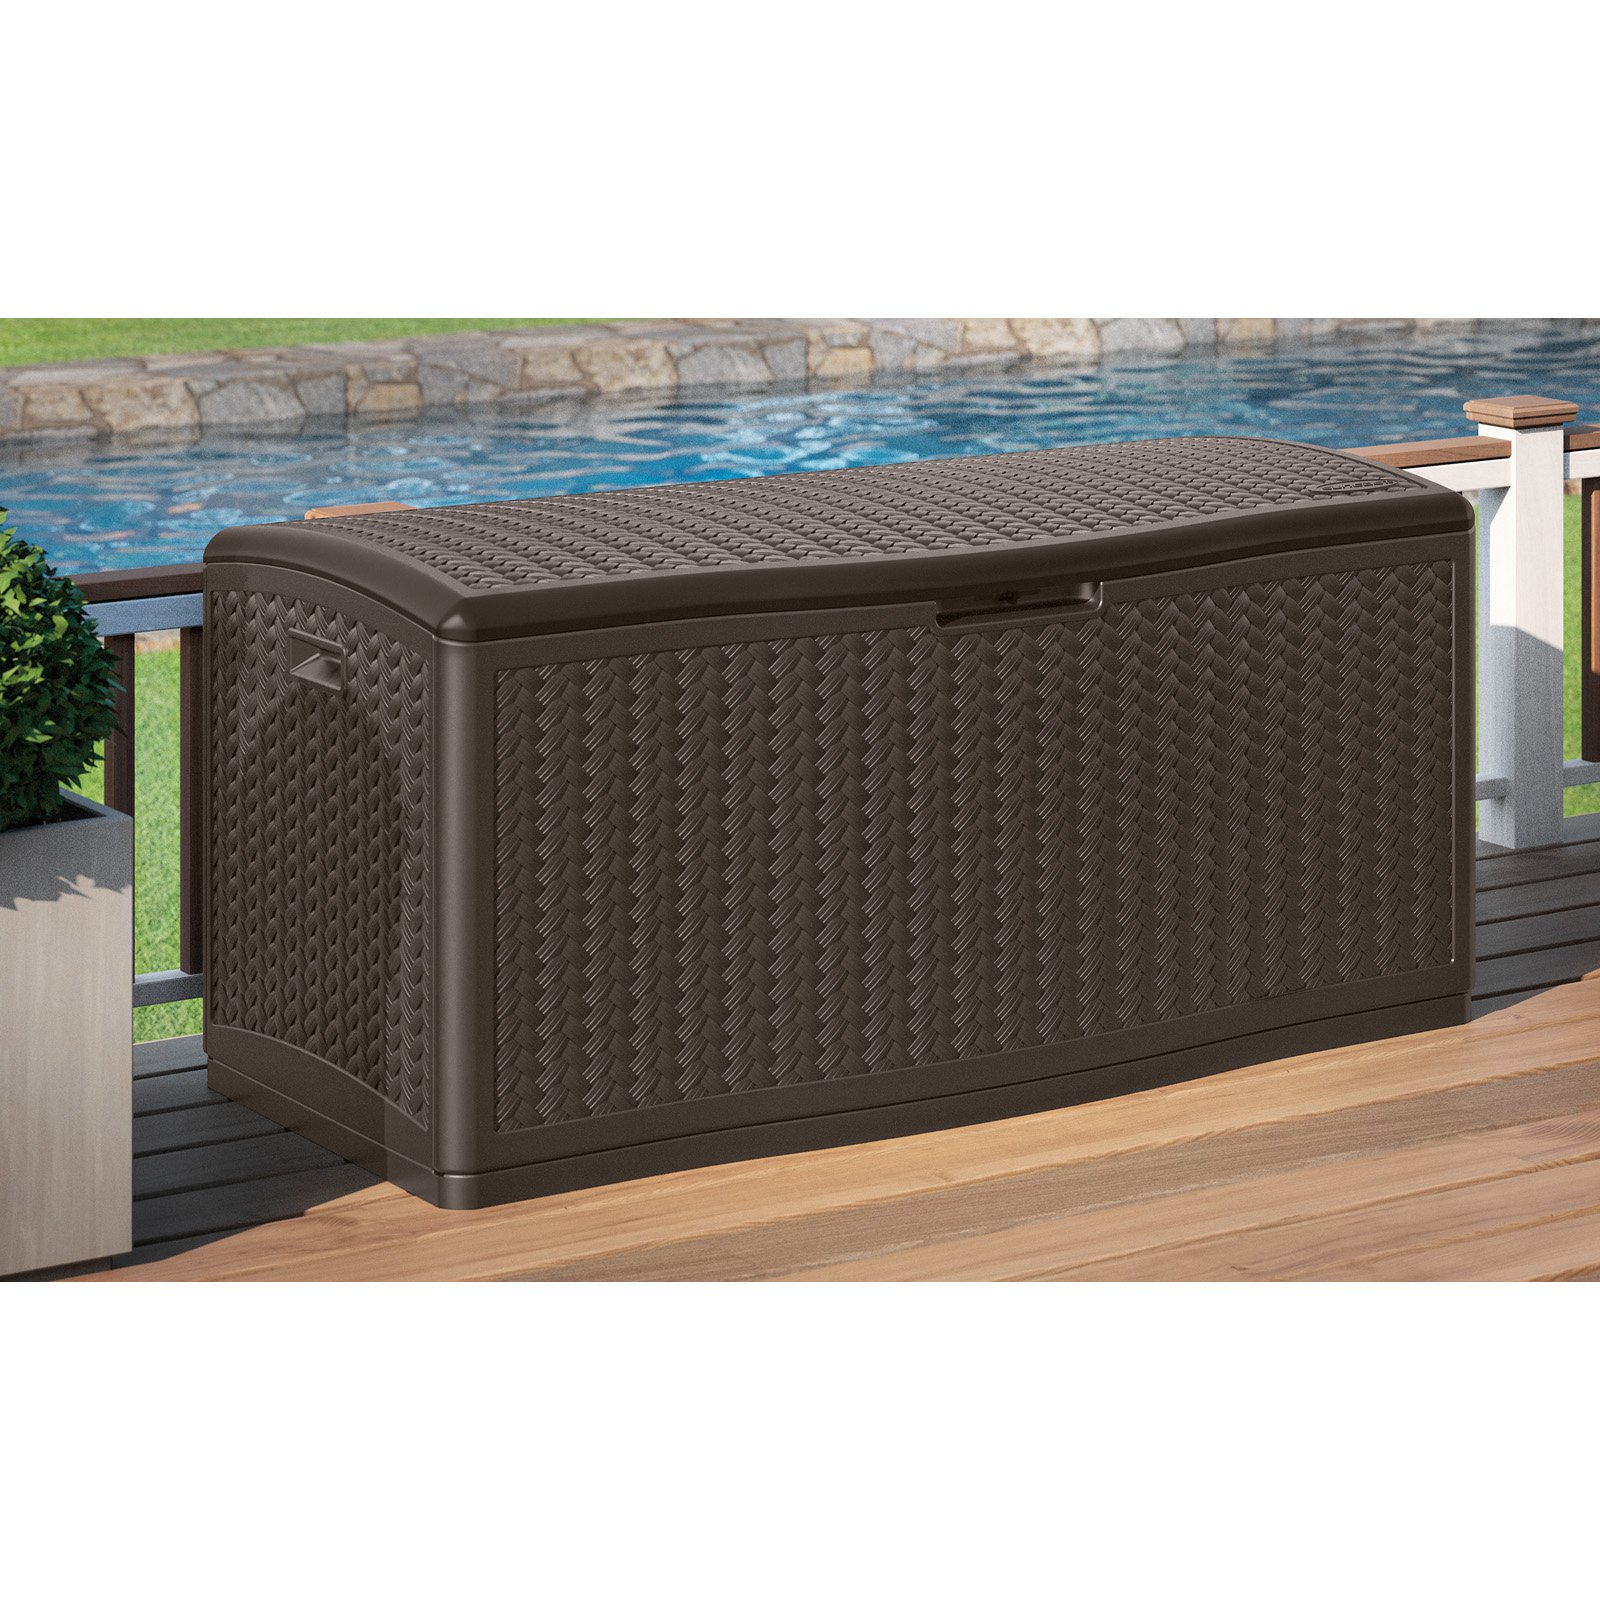 Decking Suncast Deck Boxes Ideal For Storing Patio Accessories in dimensions 1600 X 1600